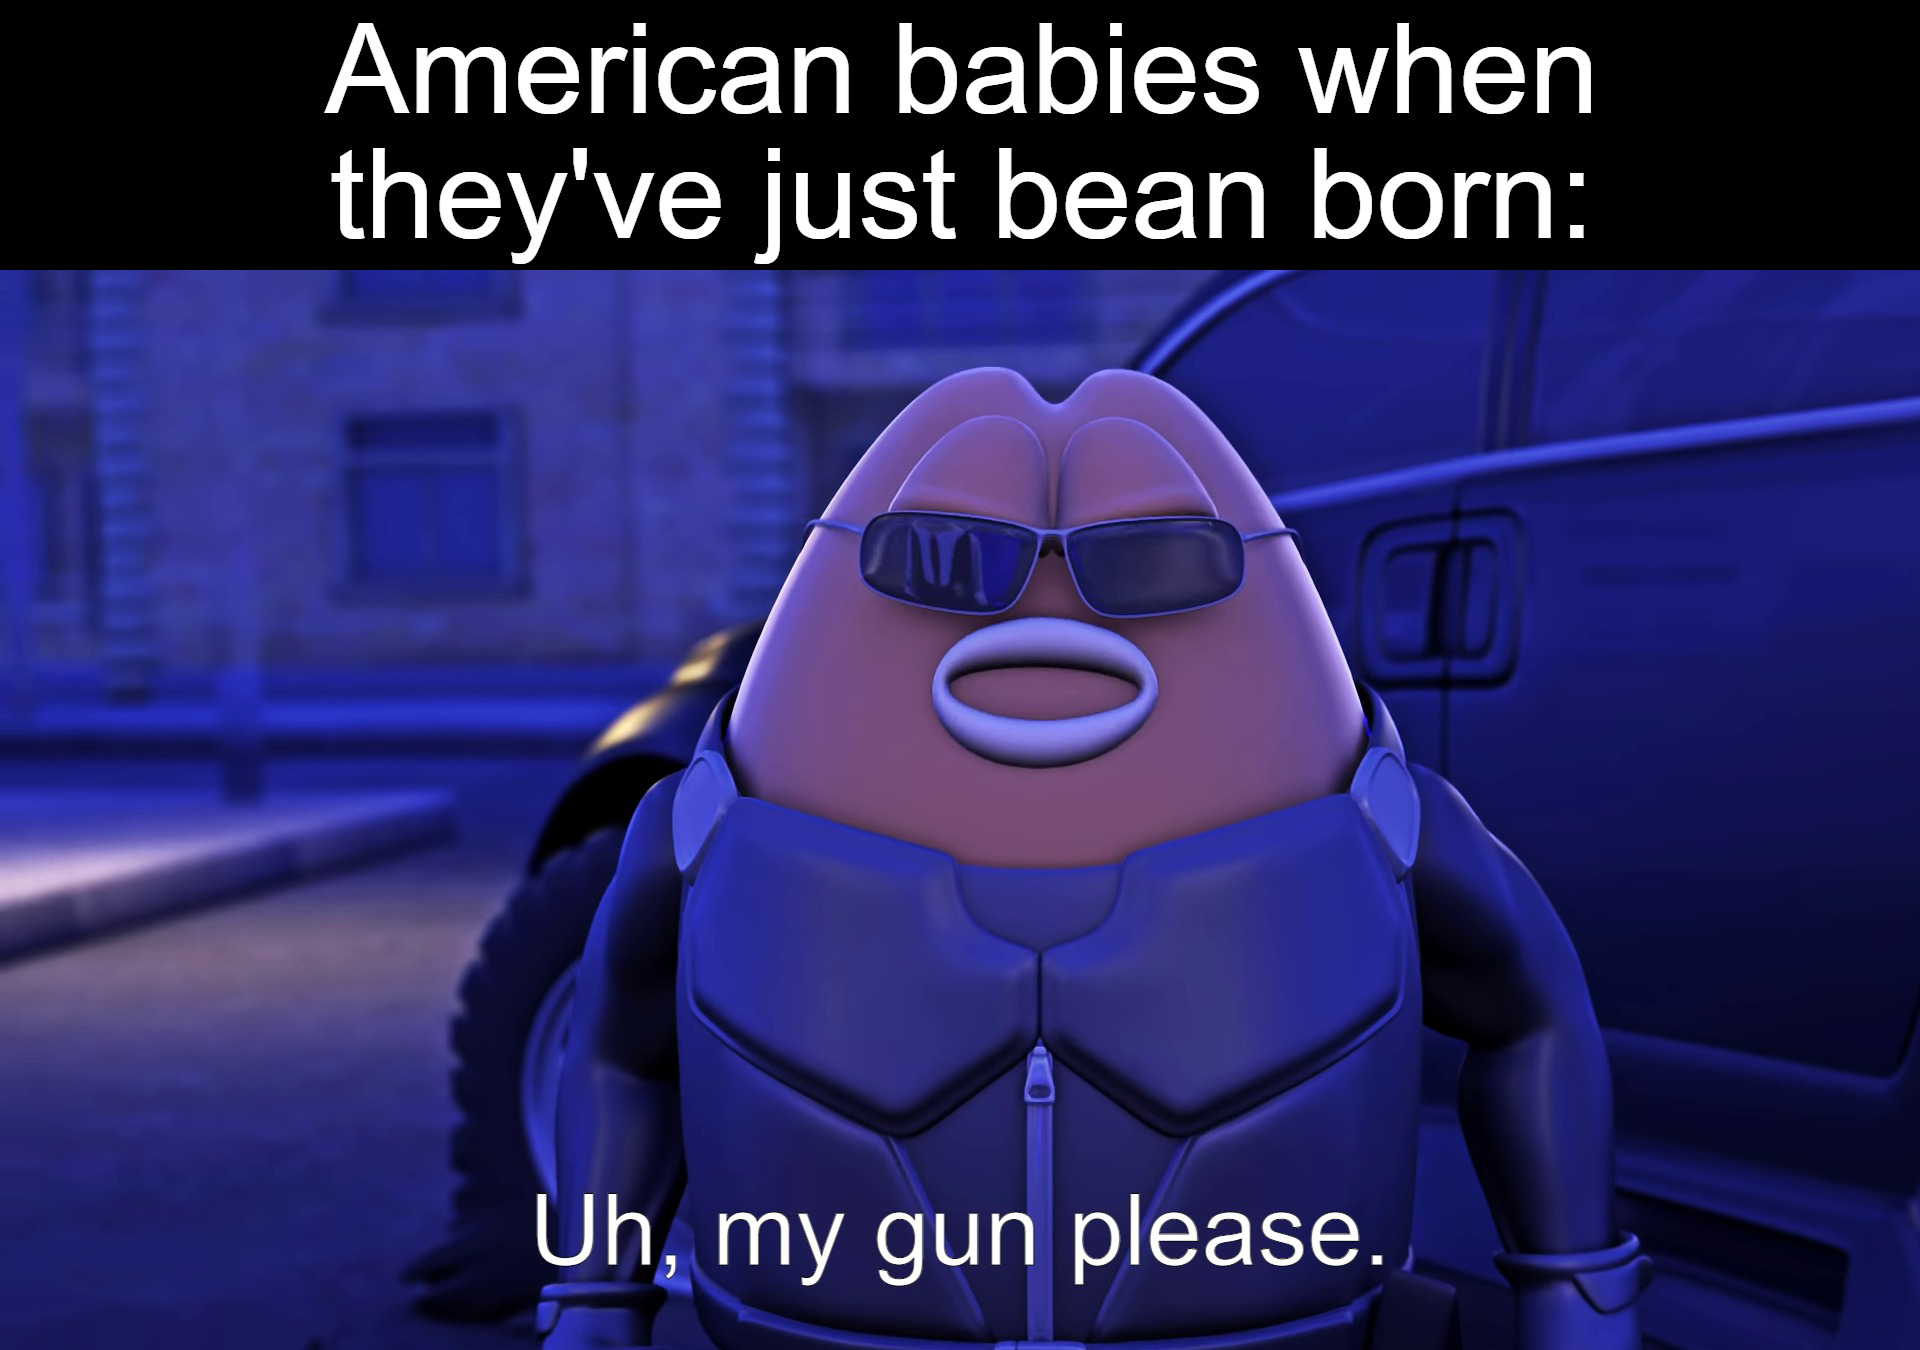 american people be like meme - American babies when they've just bean born Q o I Uh, my gun please.